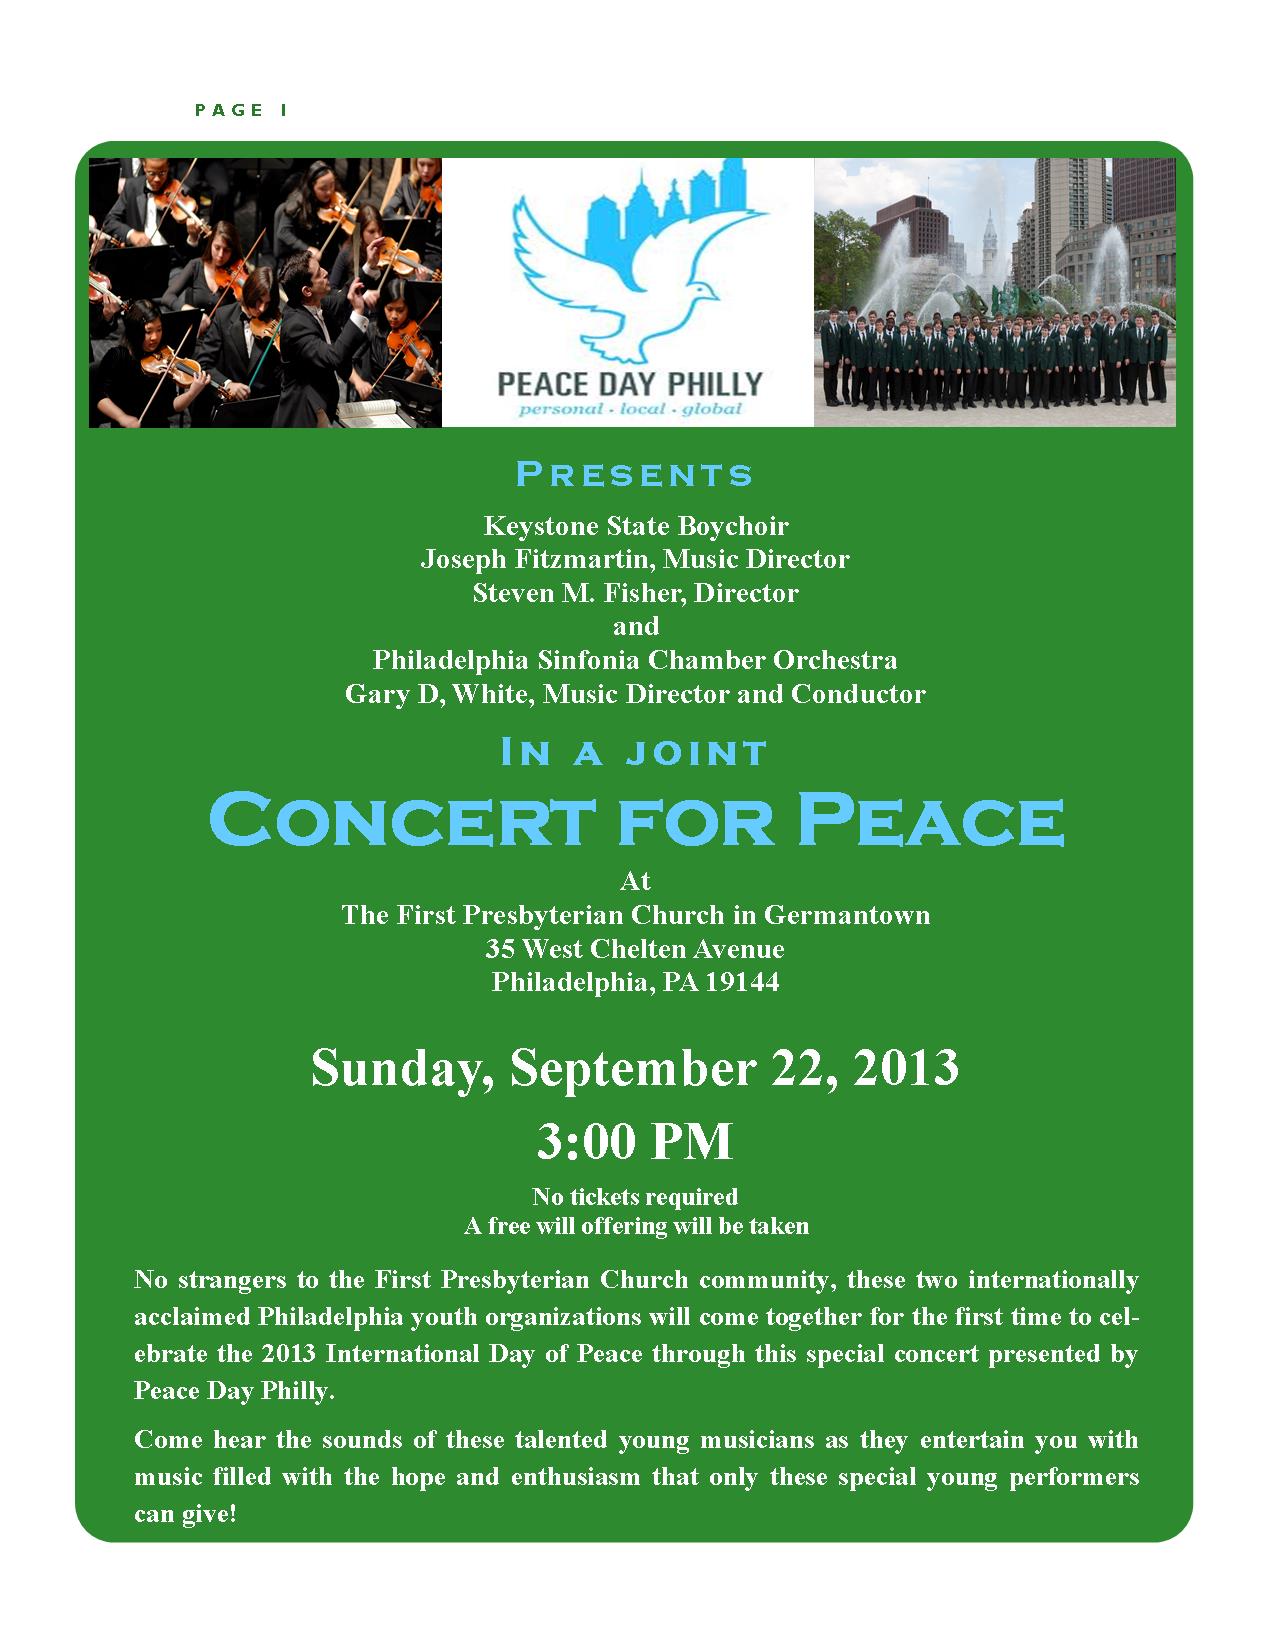 Concert for Peace First Presbyterian Church in Germantown